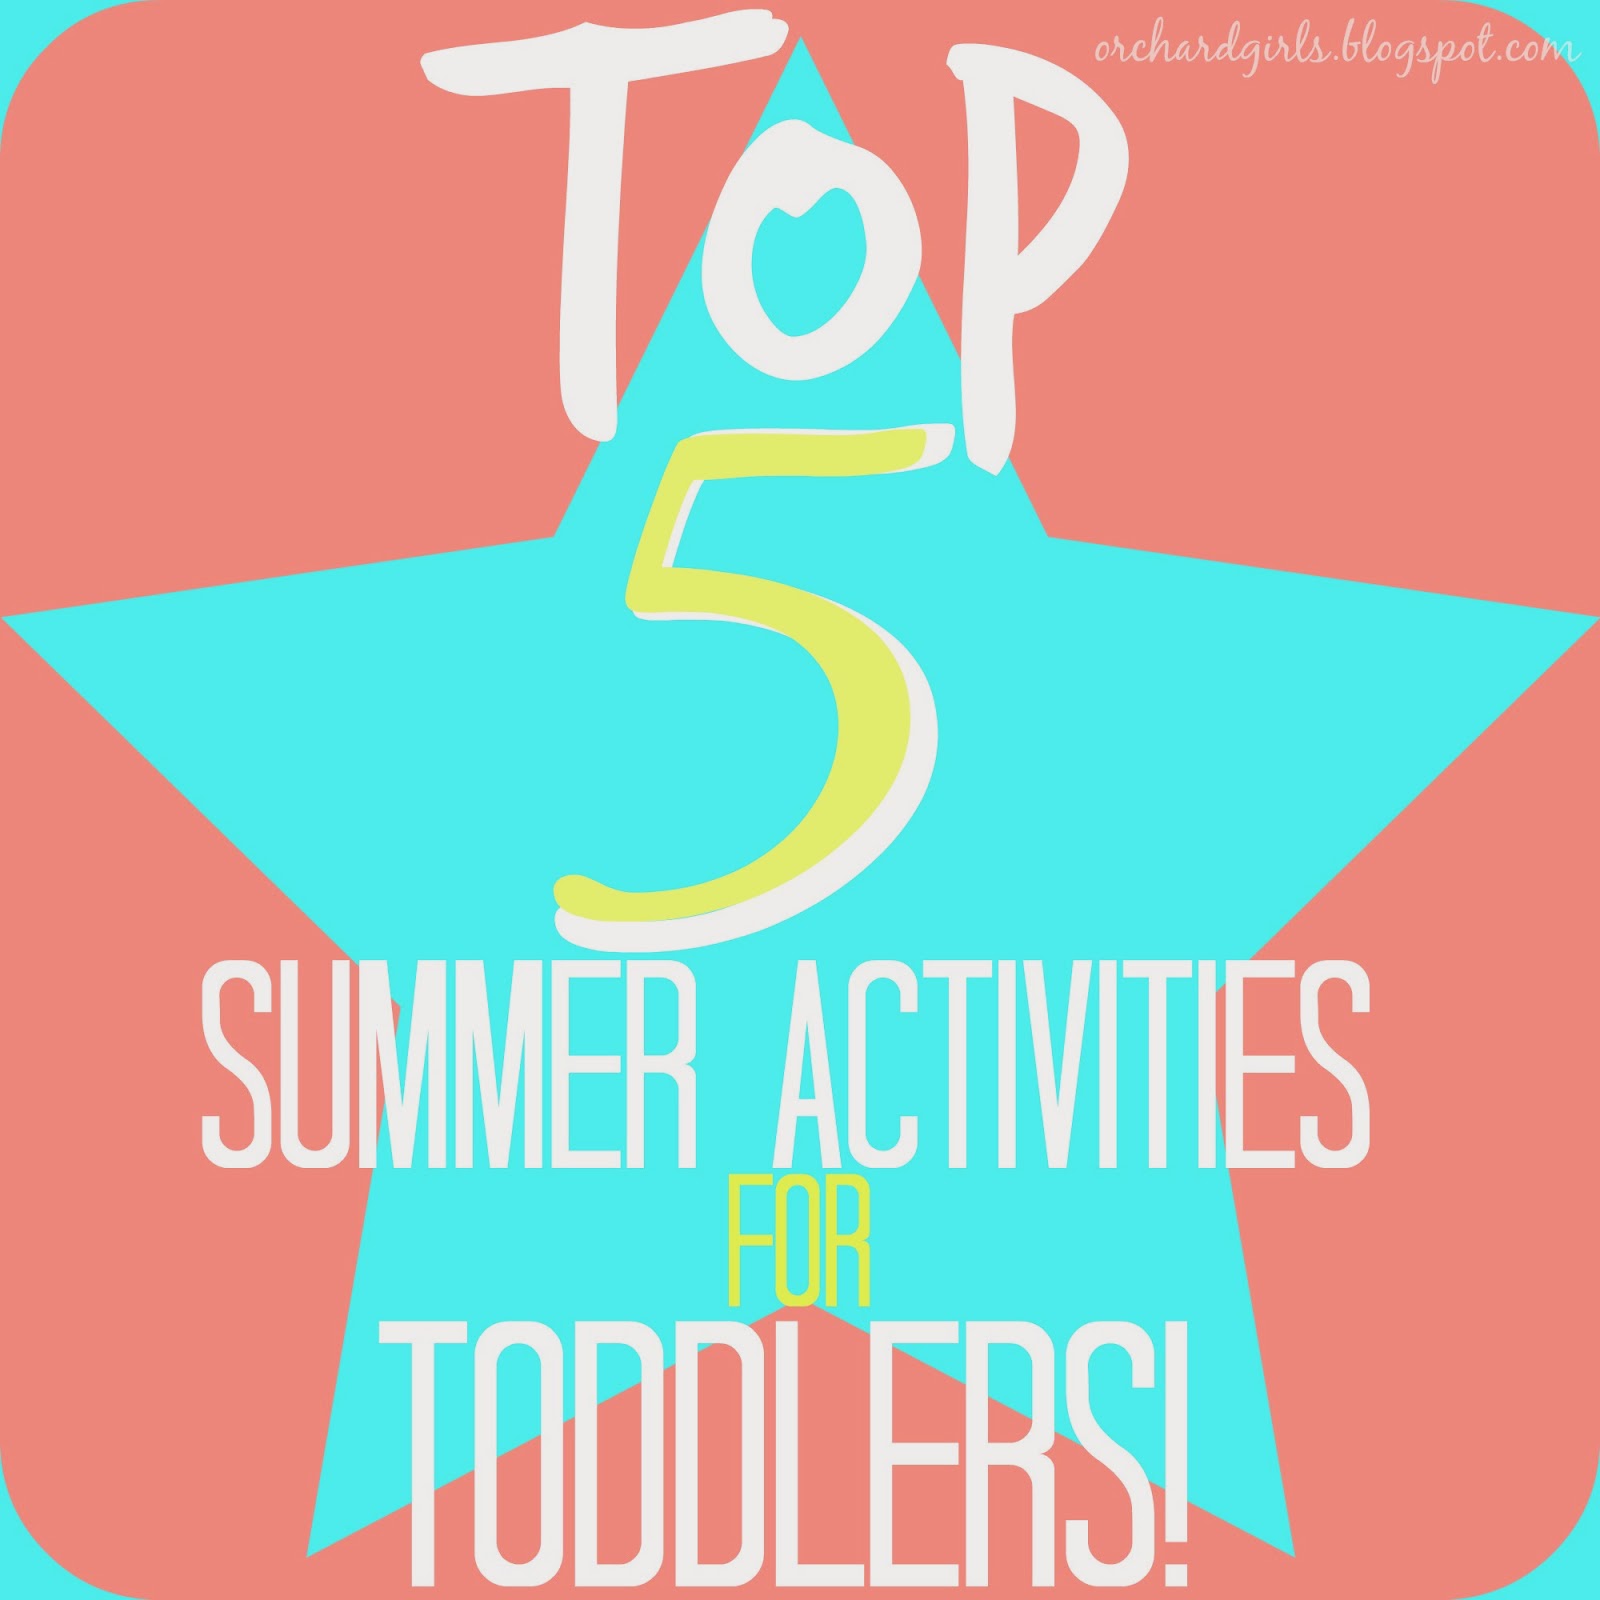 Top 5 summer activities for toddlers!!